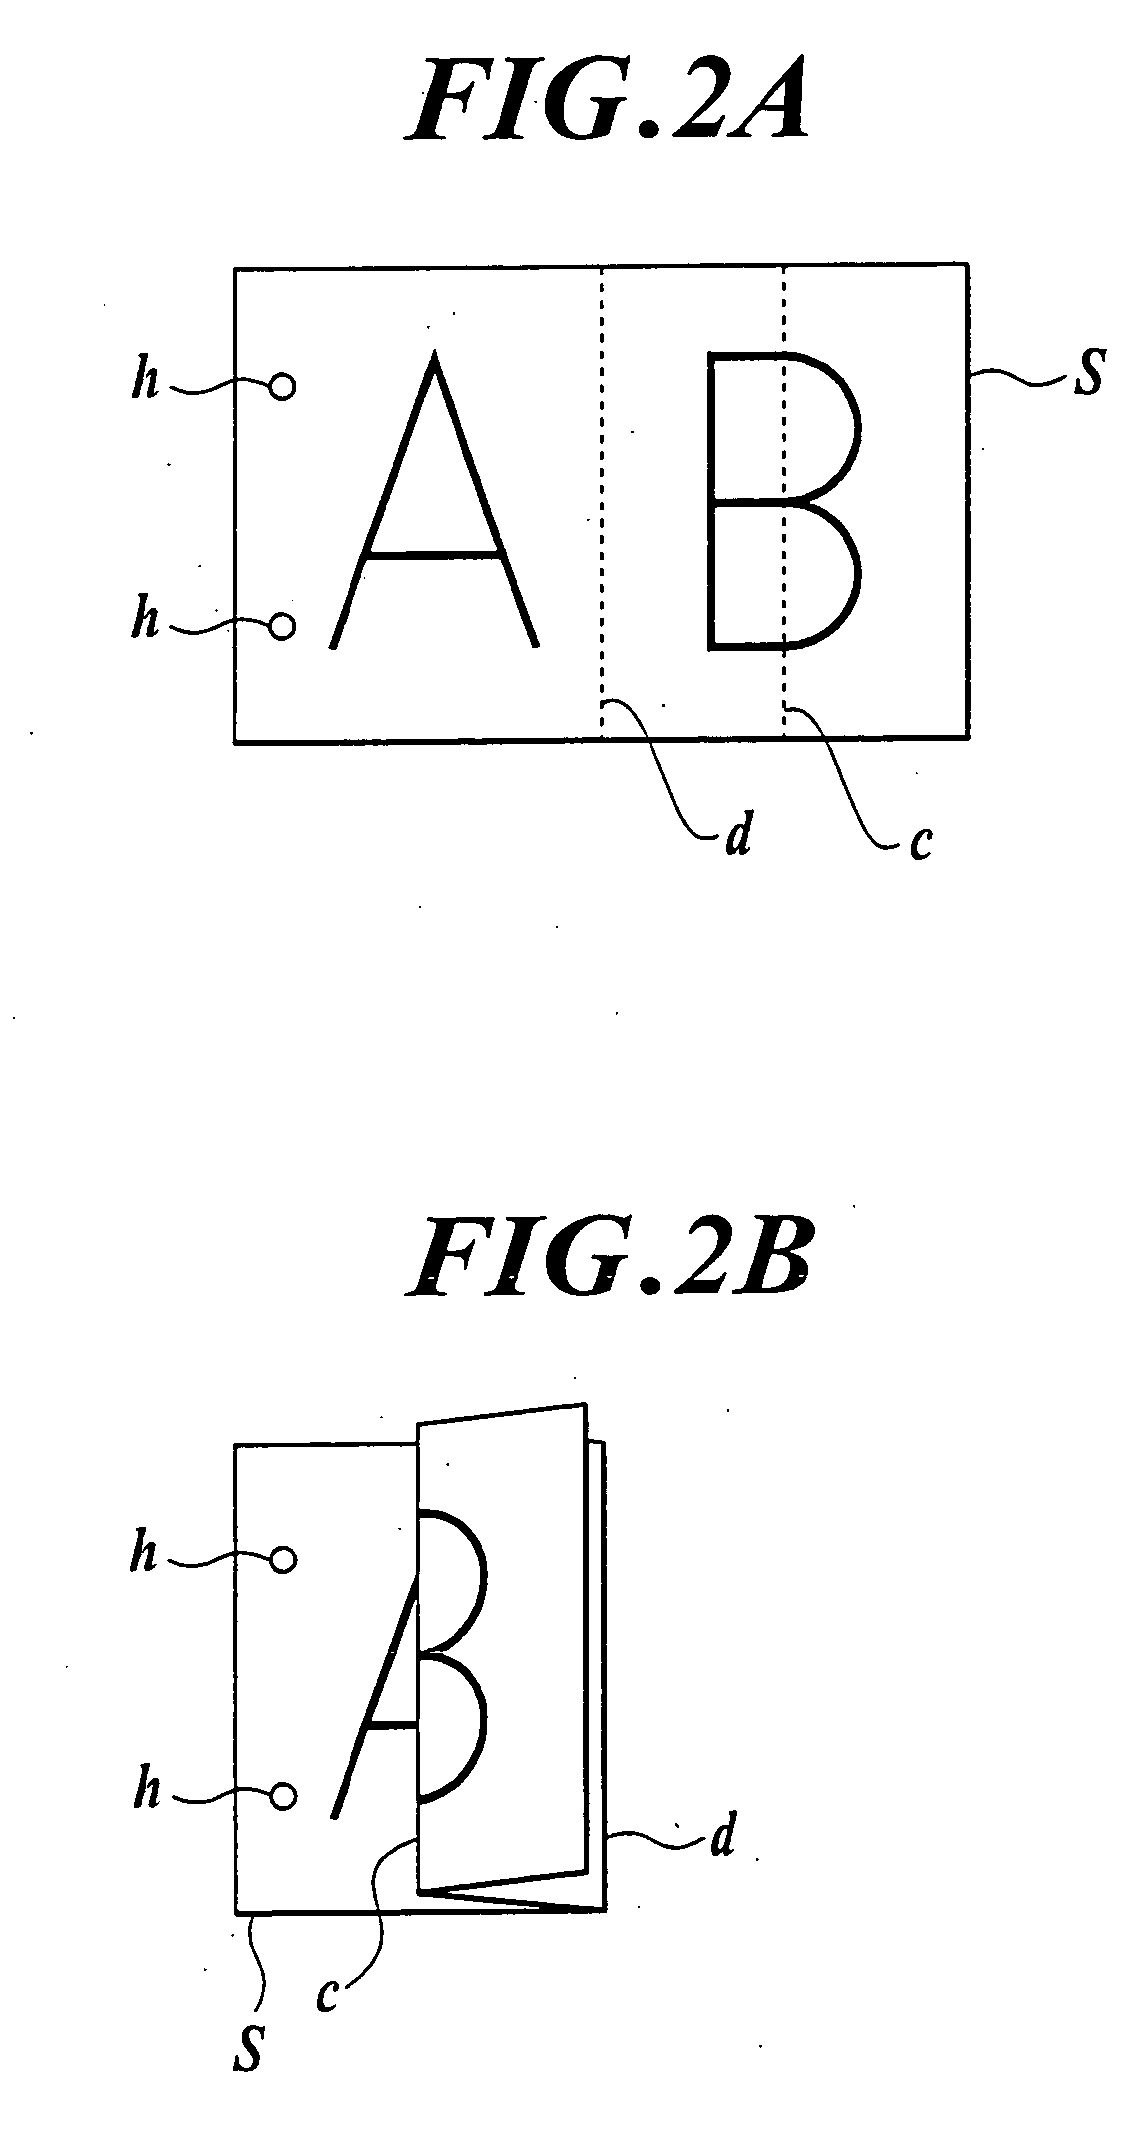 Sheet finisher, sheet processing apparatus, image forming system and methods for the same